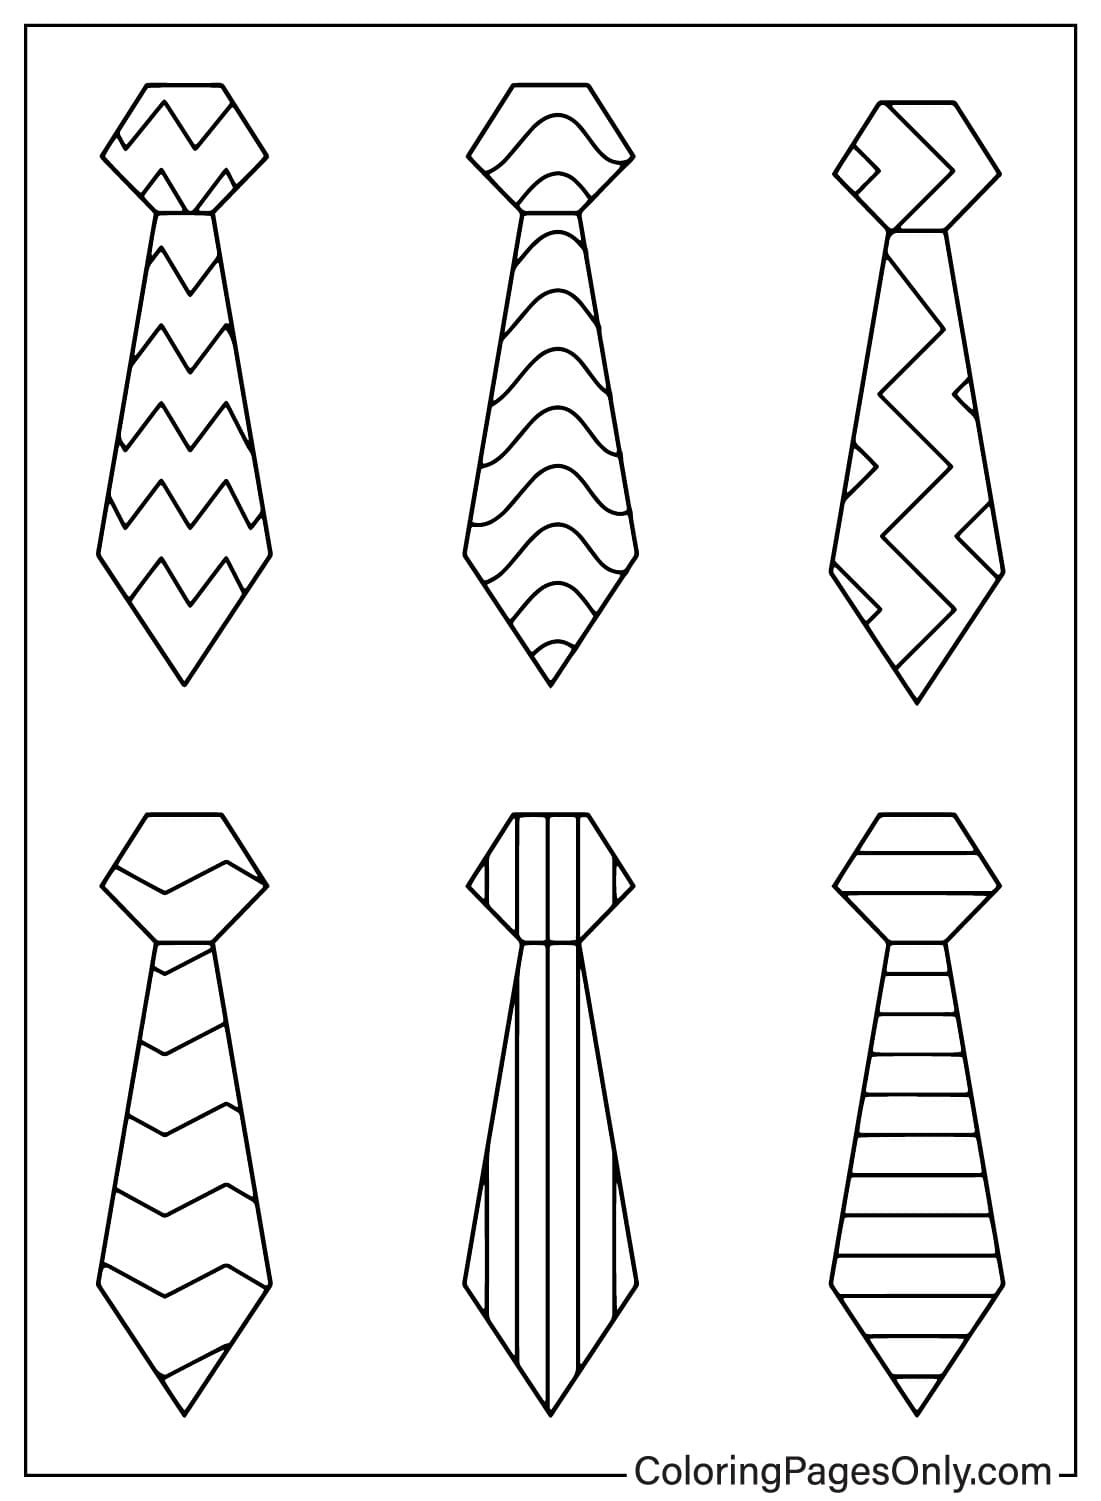 Tie Color Page - Free Printable Coloring Pages